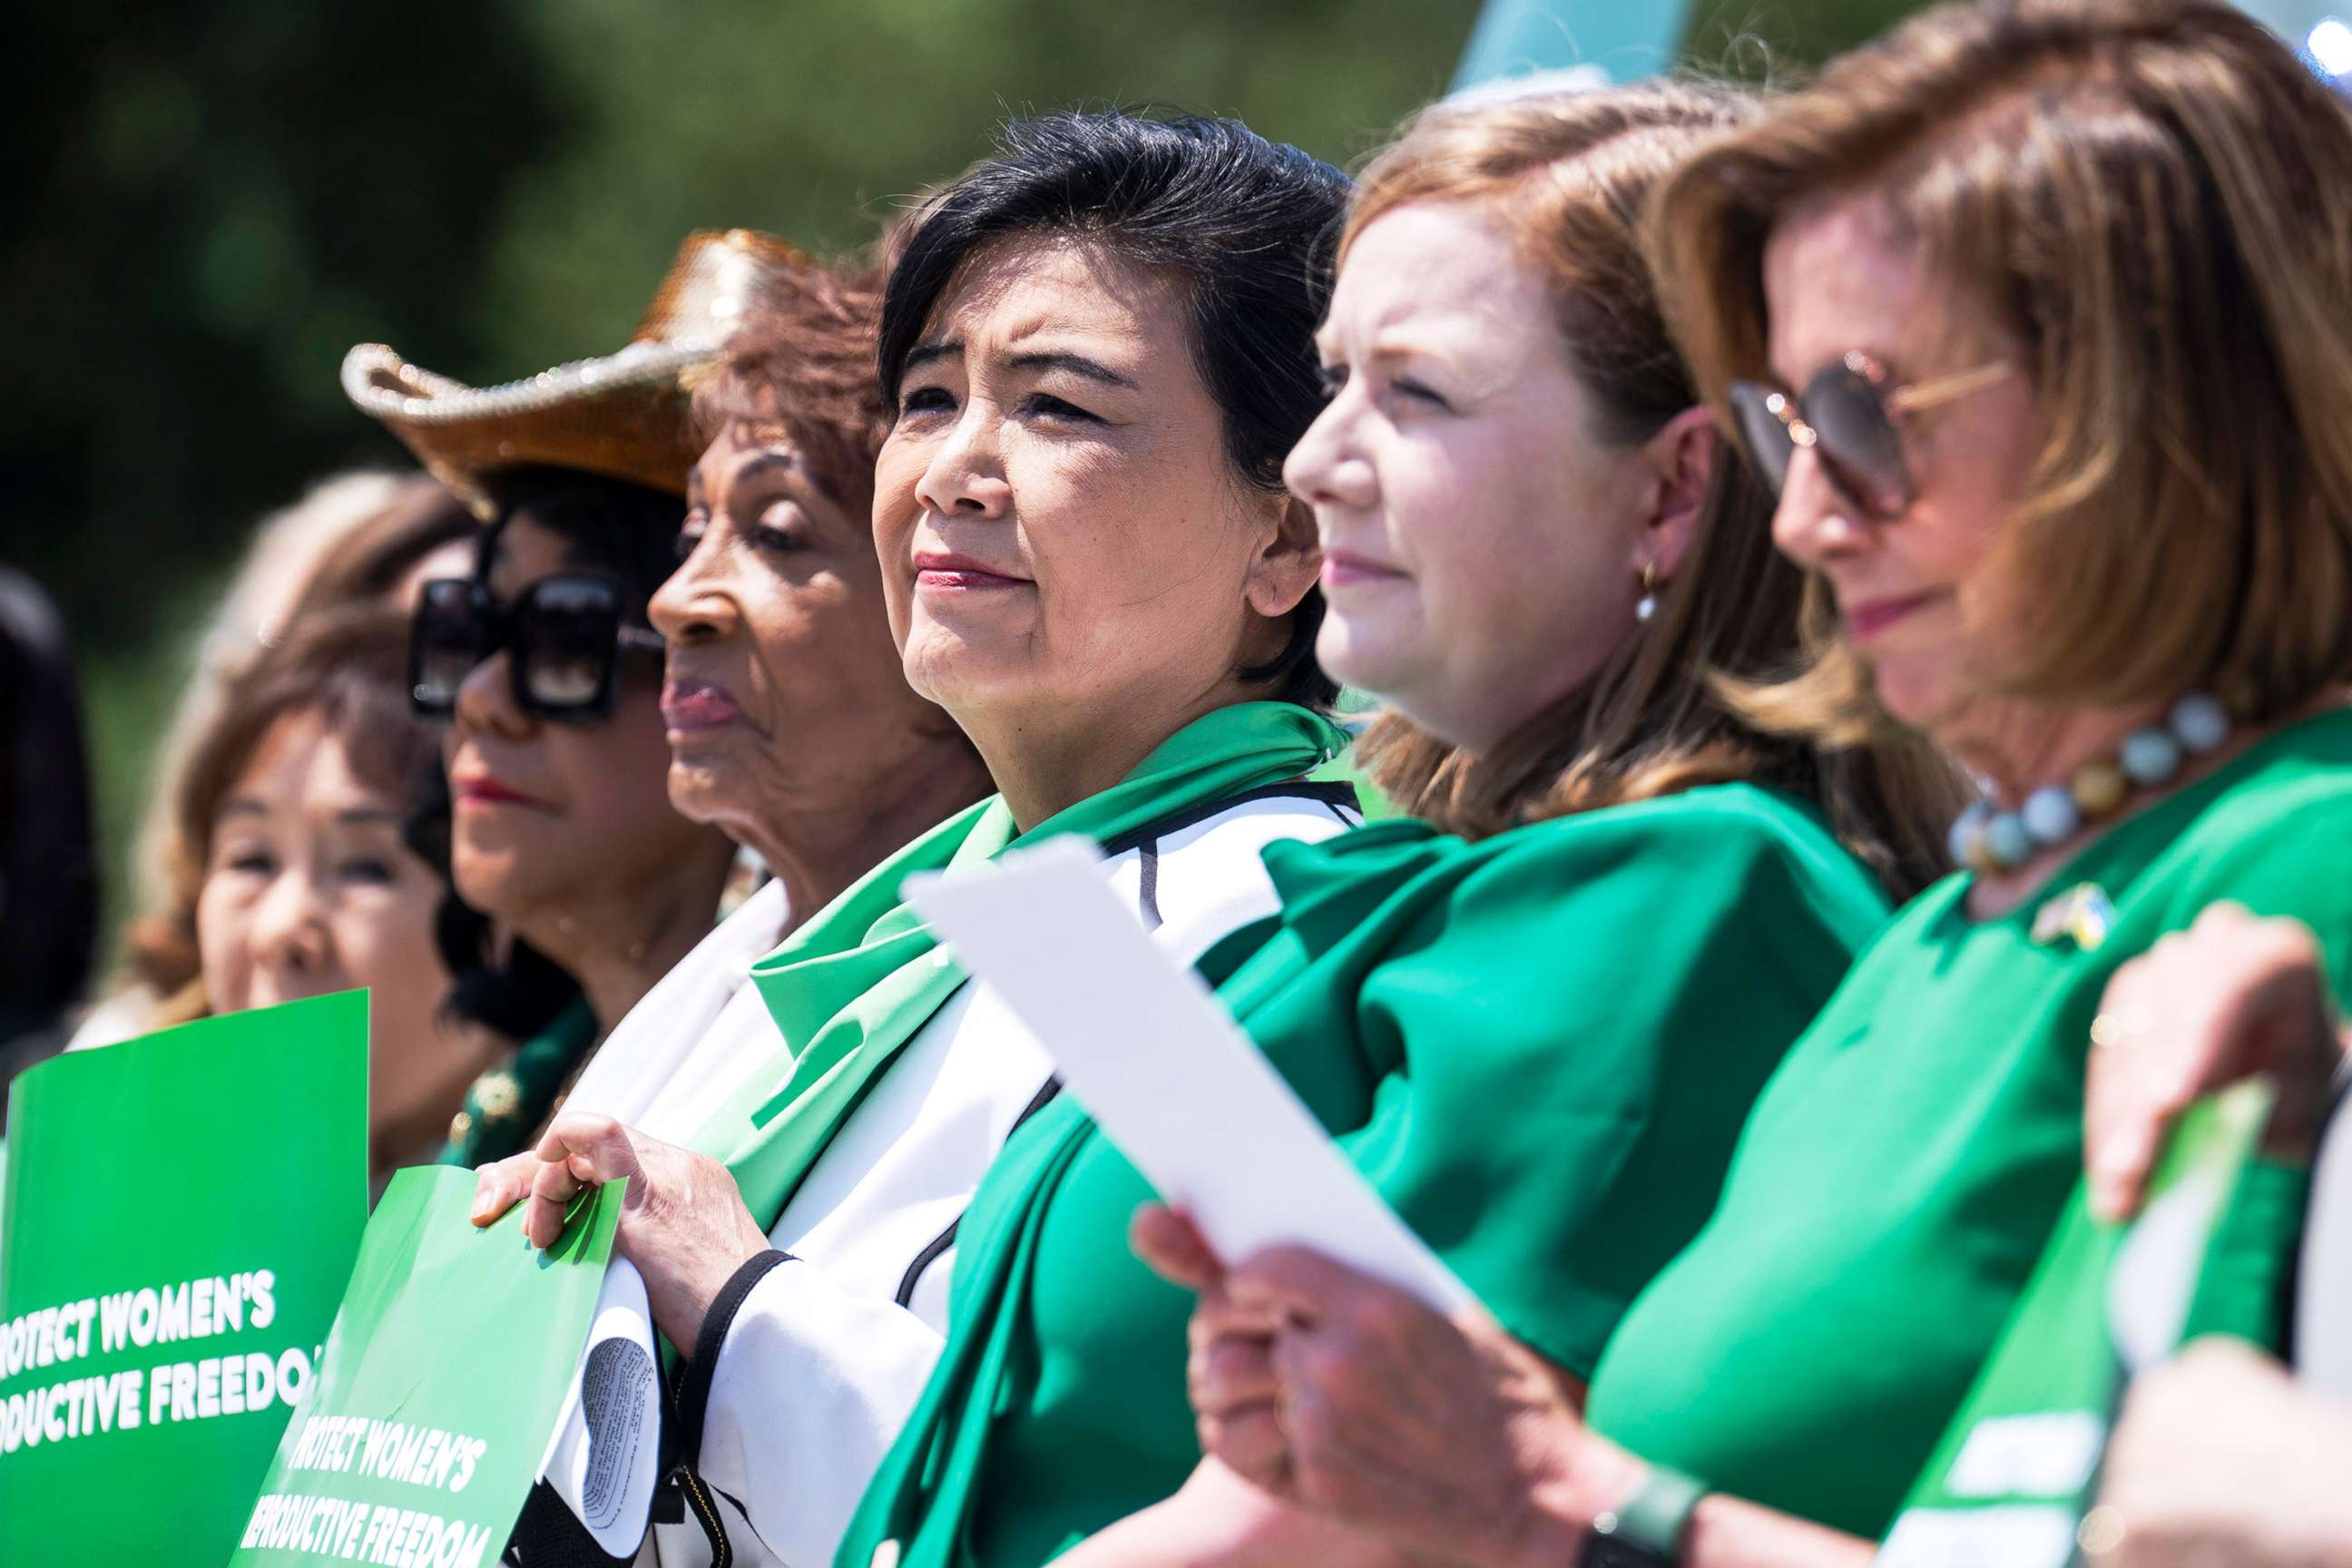 PHOTO: Rep. Judy Chu is flanked by (from right) Speaker of the House Nancy Pelosi, Reps. Lizzie Fletcher, Maxine Waters, and Frederica Wilson, as they attend a rally on the steps of the U.S. Capitol, July 15, 2022.